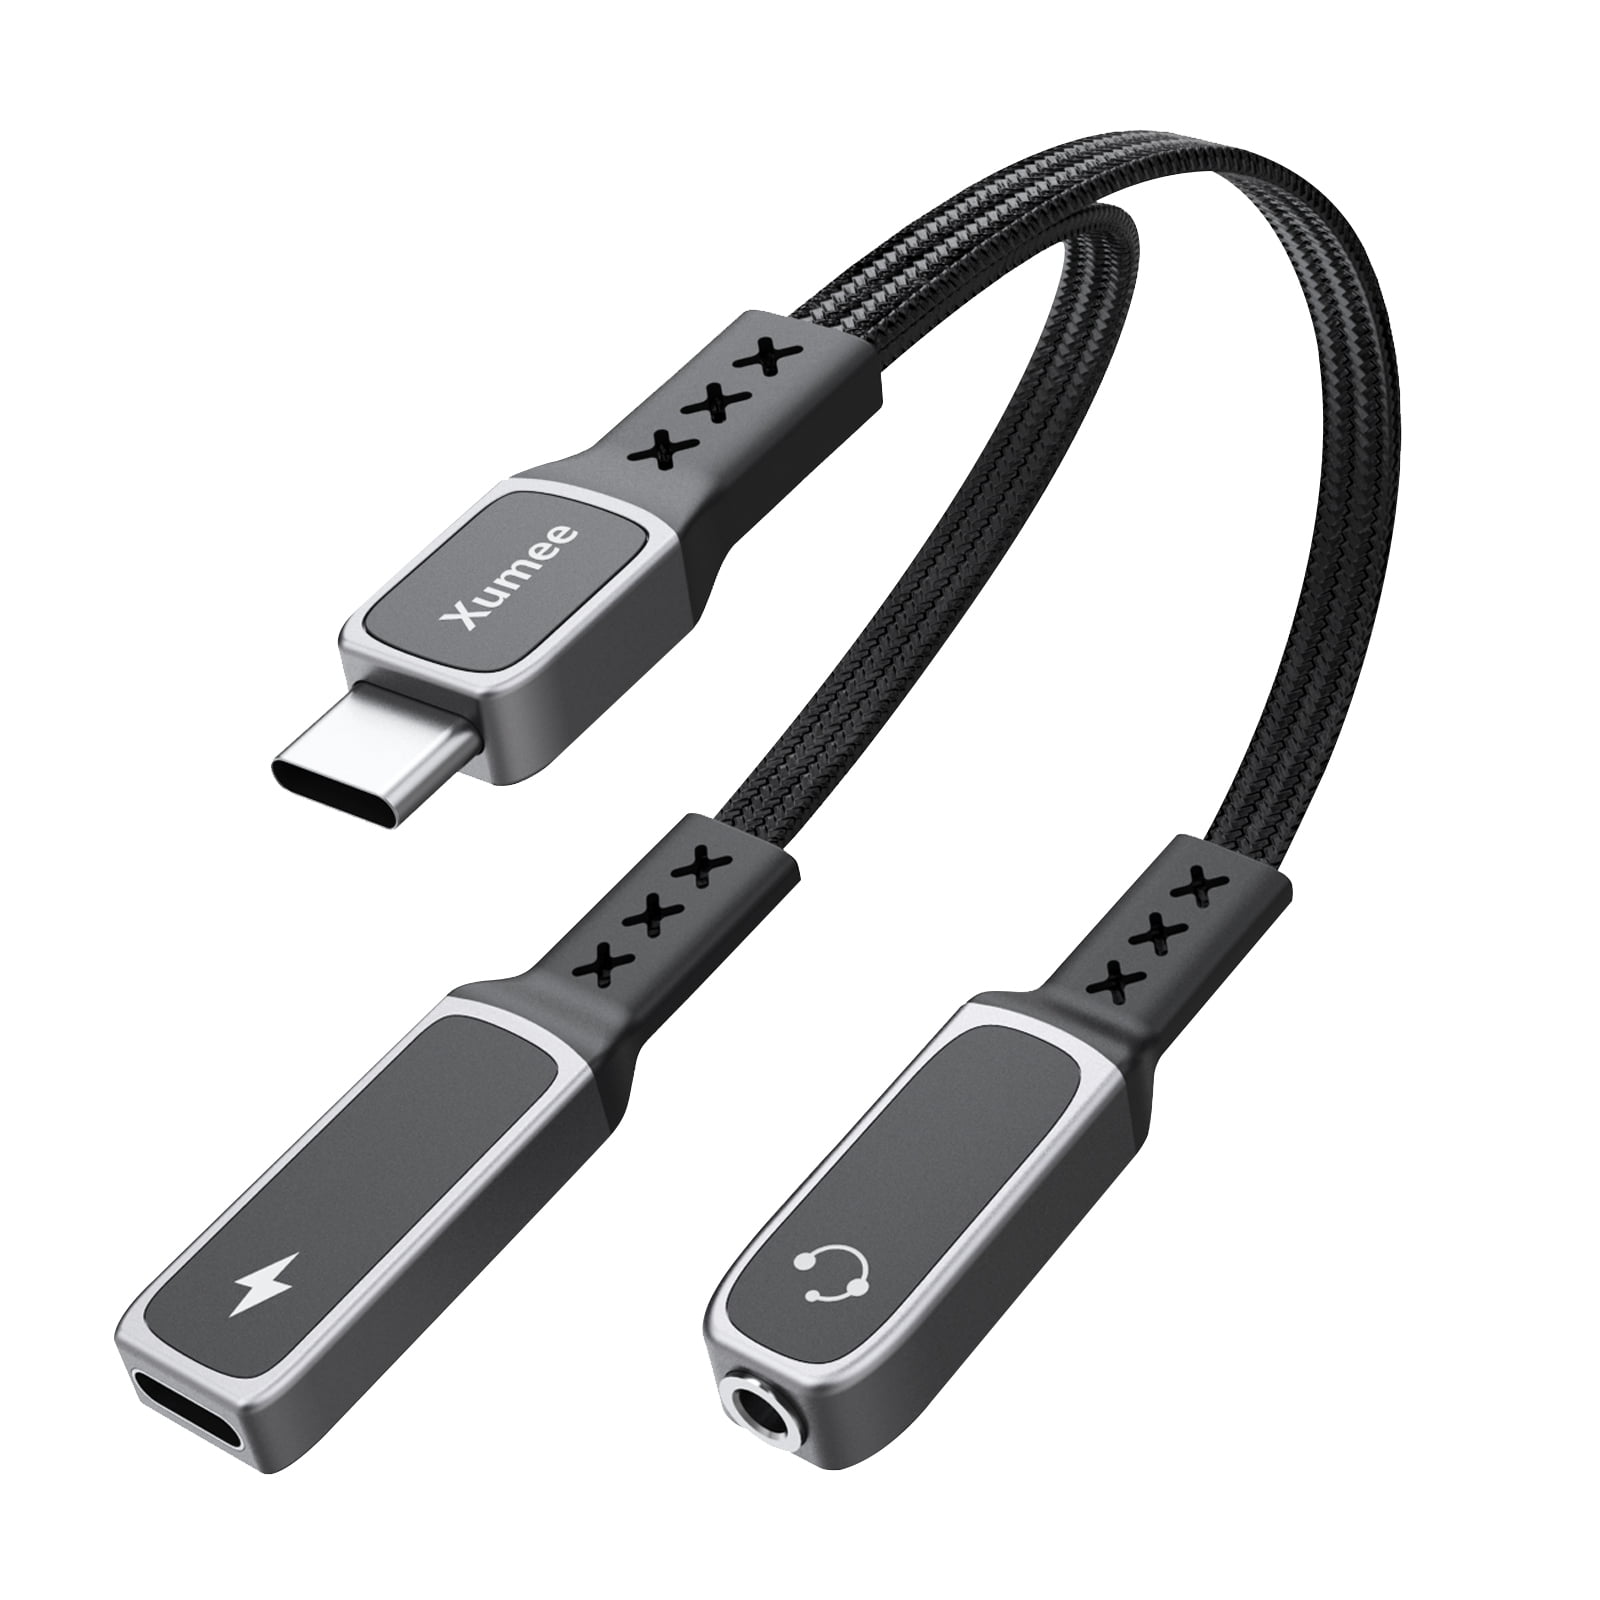 USB-C Splitter (2-in-1 USB C Headset & Charge Adapter)